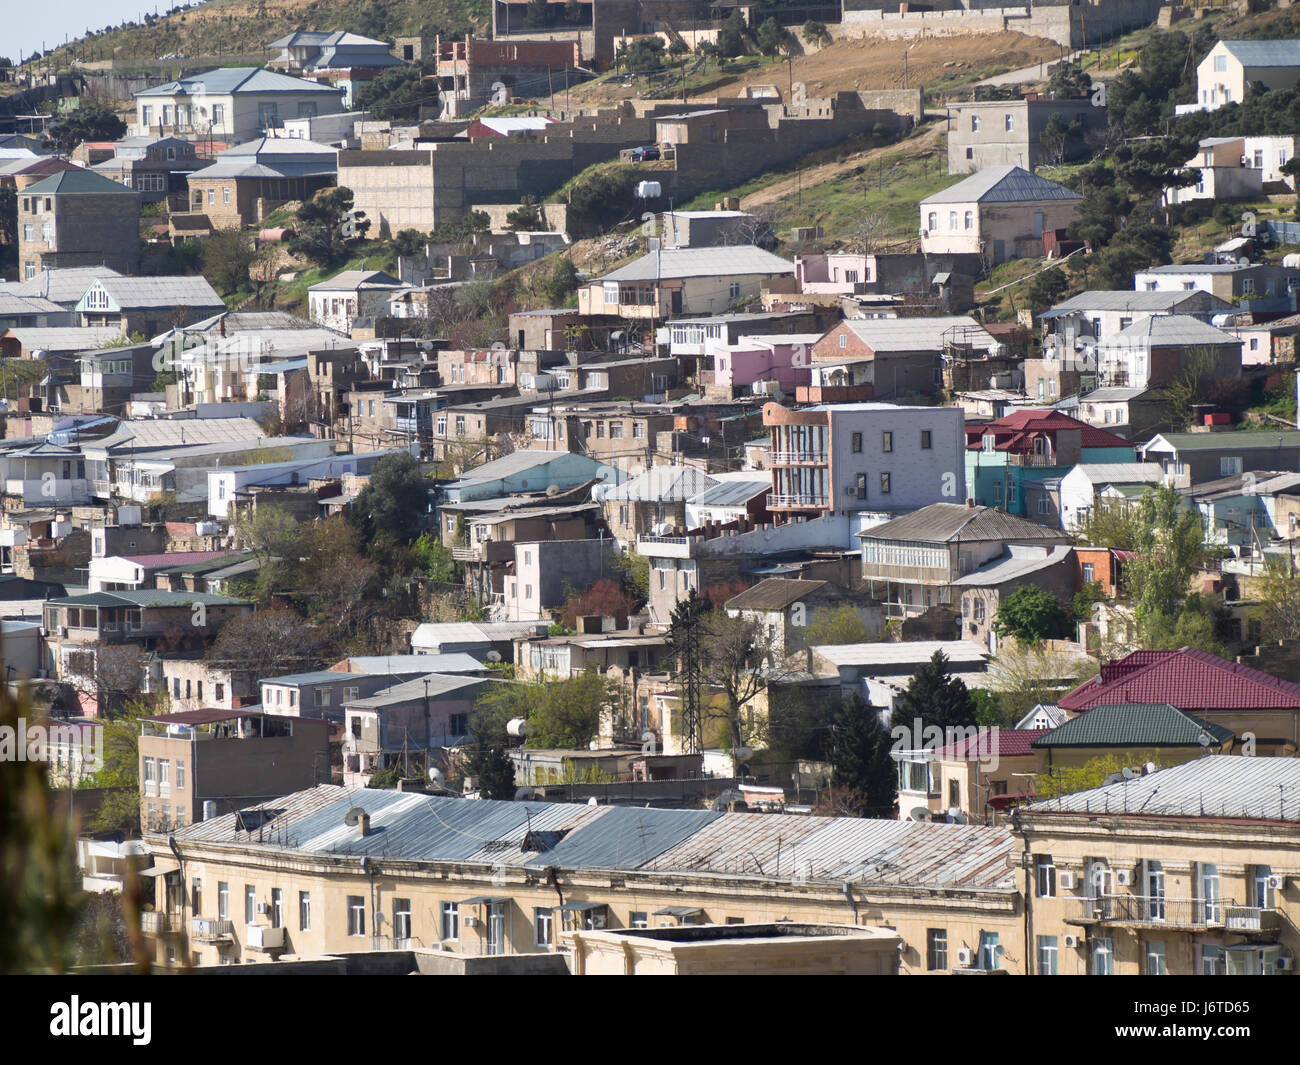 Baku, the capital city of Azerbaijan, on the shore of the Caspian sea, view of the residential district Bayil from the Dagustu park Stock Photo